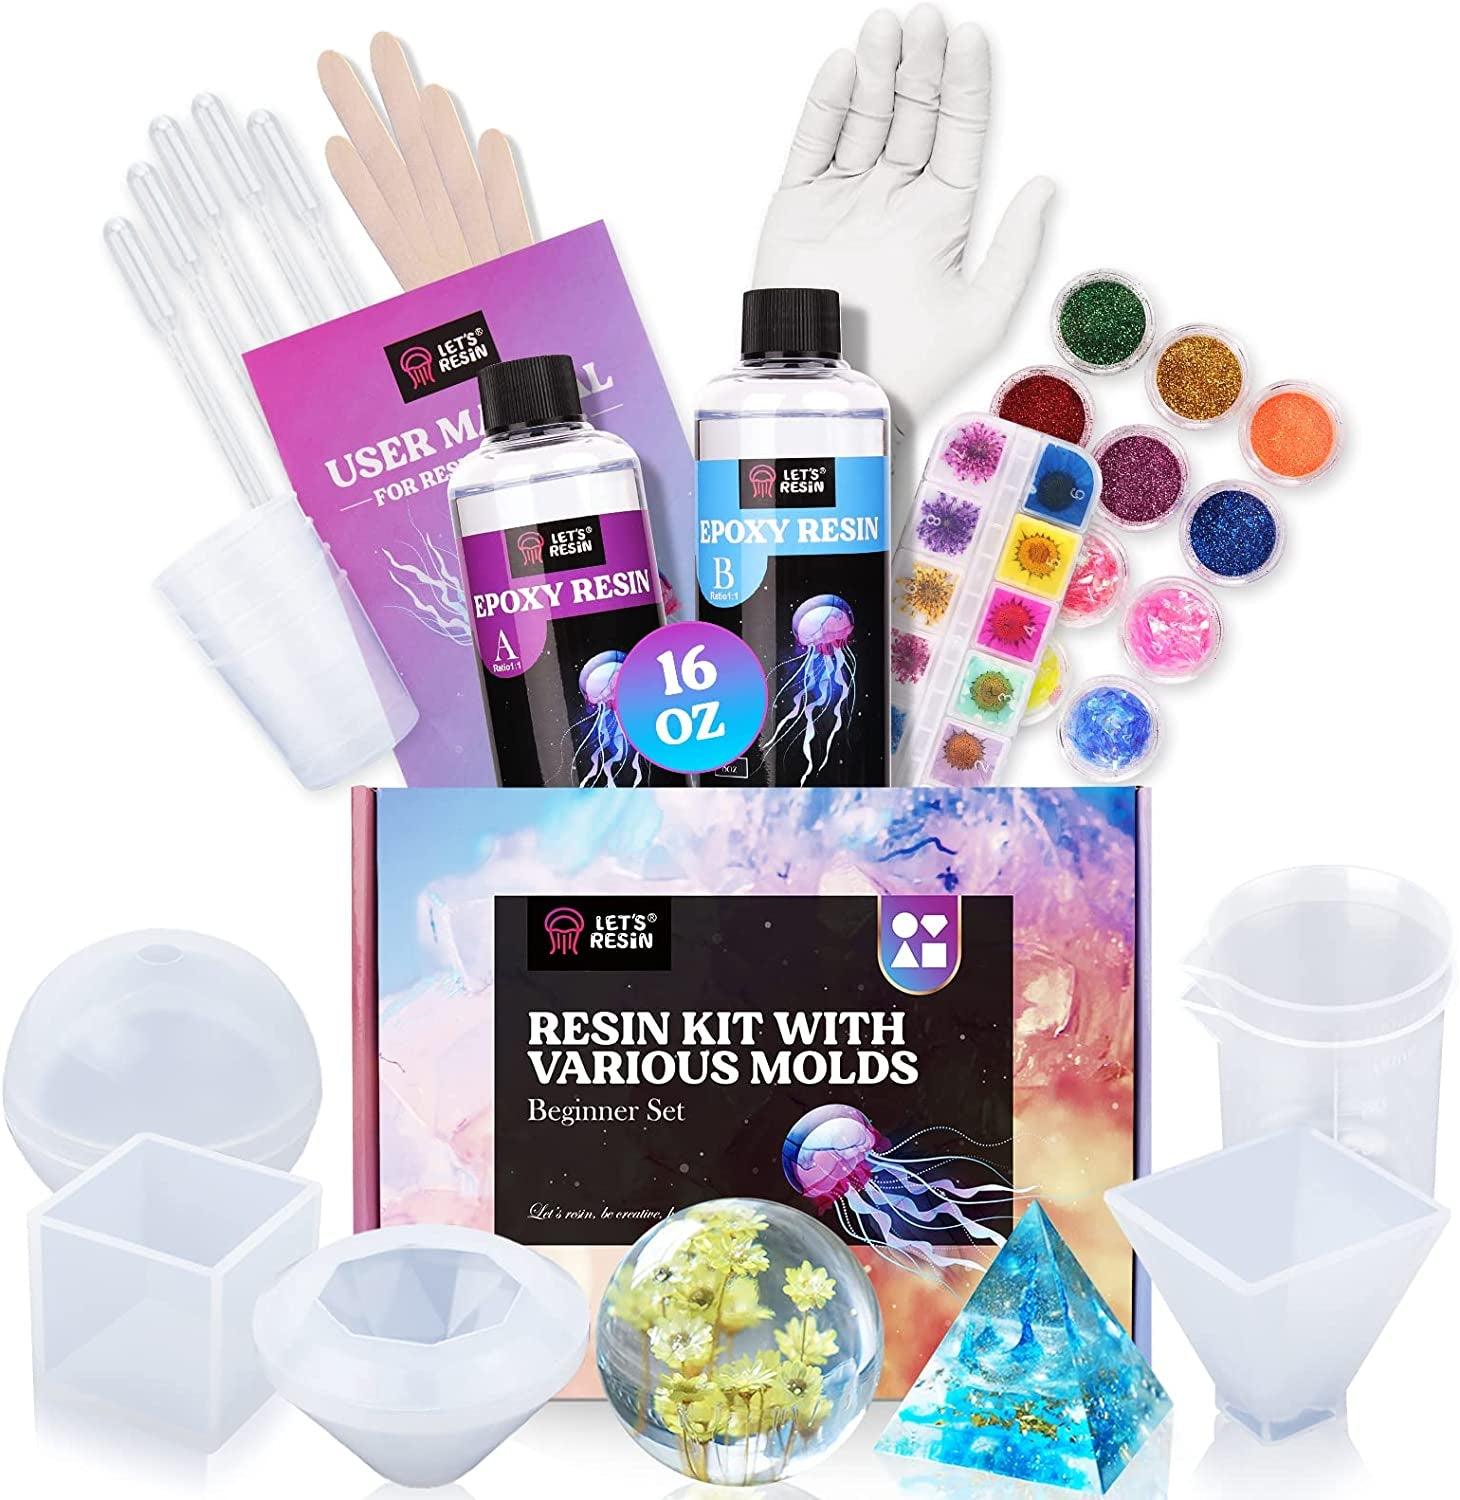 Resin Kits and Molds Complete Set, 16OZ Resin Molds Silicone Kit Bundle with Sphere, Pyramid Molds, Glitter and Dried Flowers - WoodArtSupply